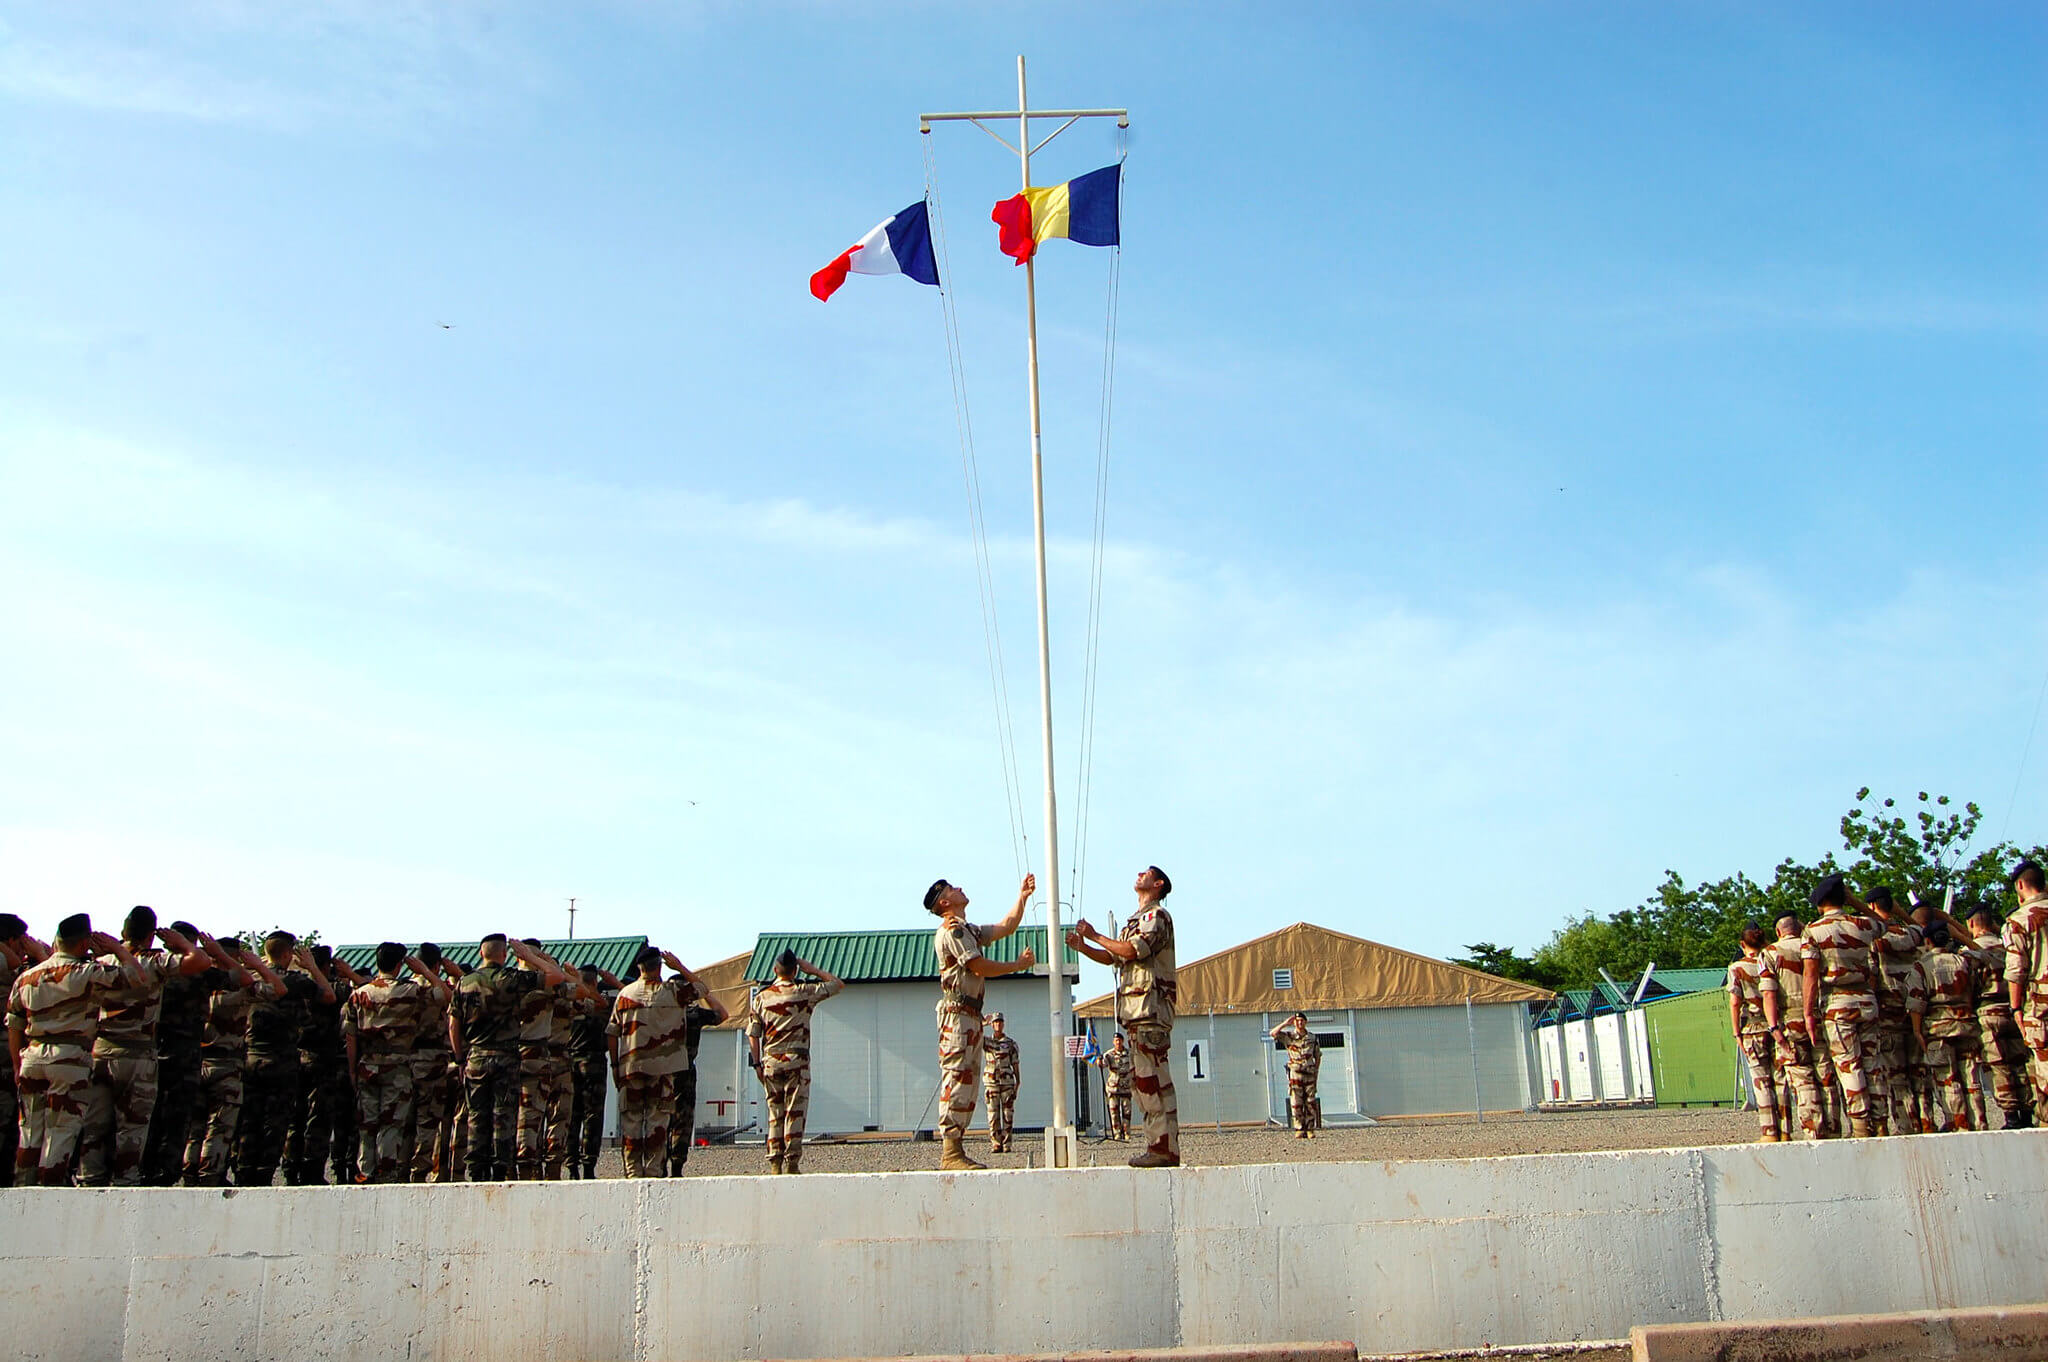 French and Chad military participate in a flag ceremony to commemorate the launch of Operation Barkhane, an anti-terrorist operation in Africa's Sahel region beginning in July 2014. © US Army Africa